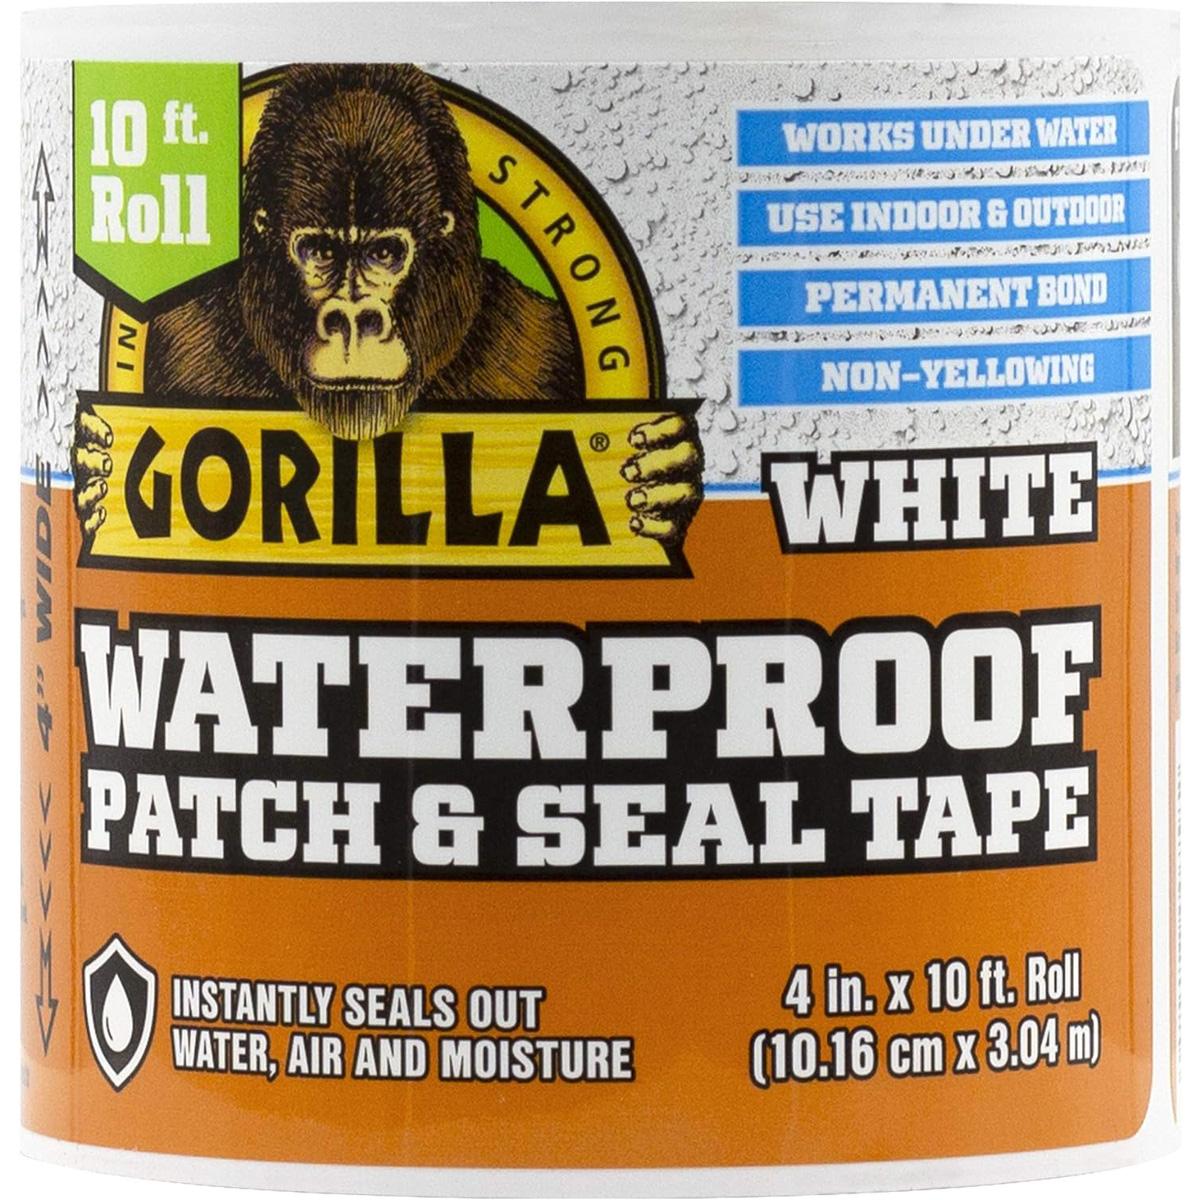 Gorilla Waterproof Patch and Seal Tape 10ft fro $9.99